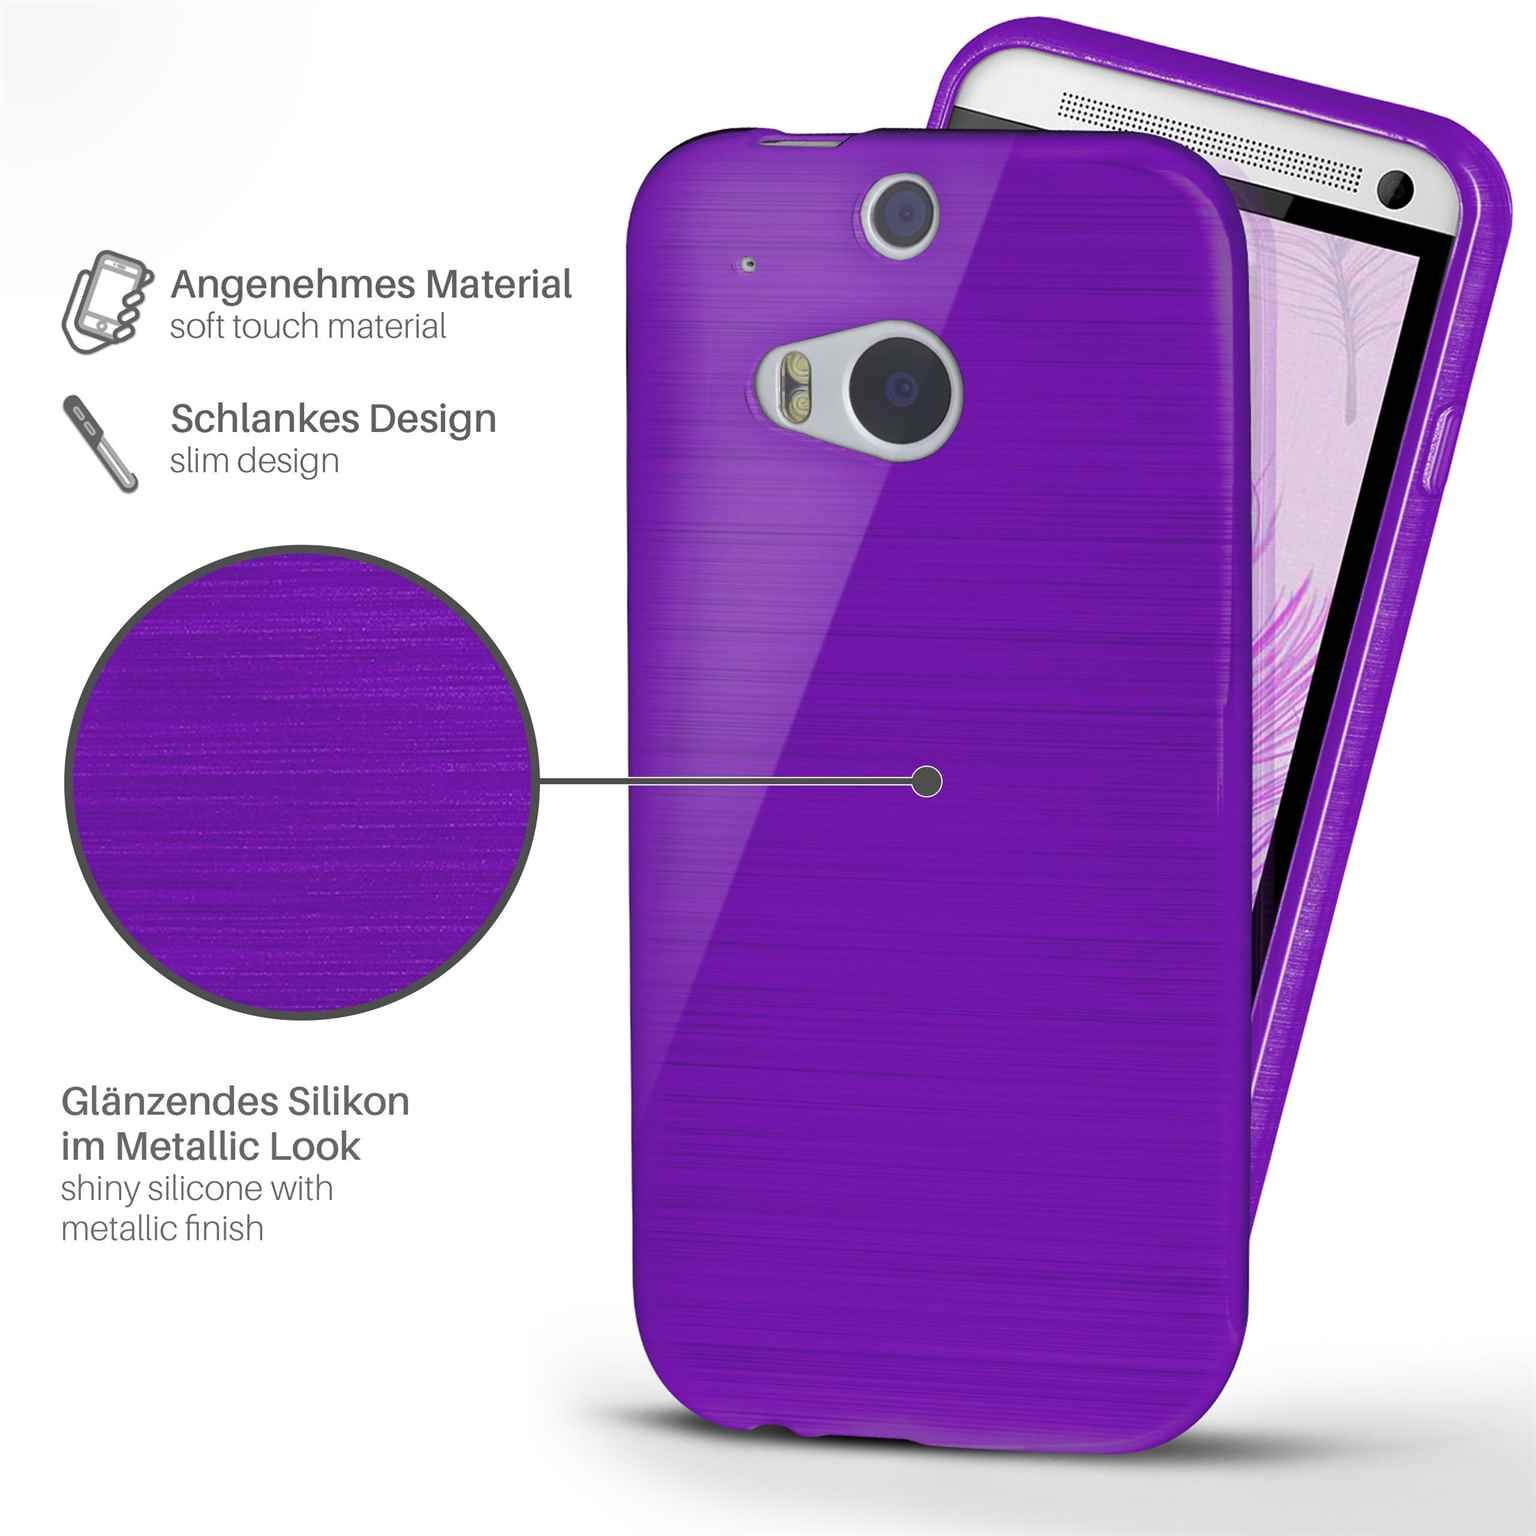 Case, MOEX M8, Purpure-Purple Brushed Backcover, HTC, One